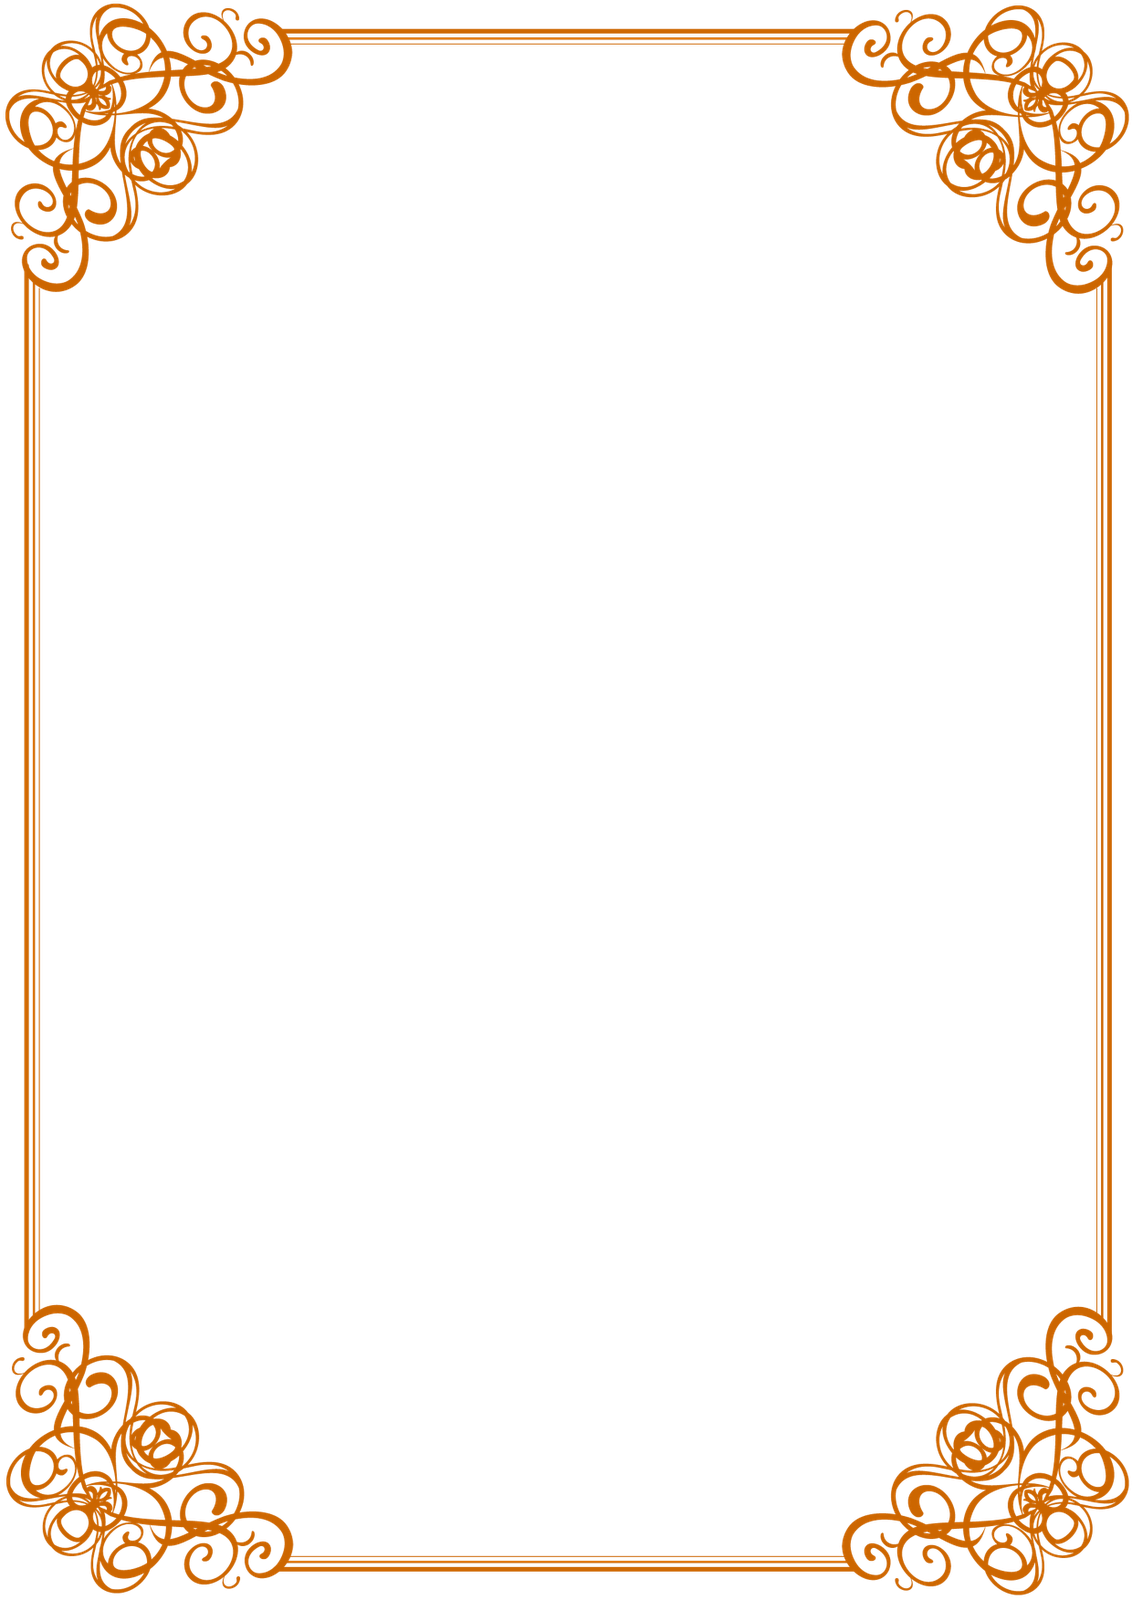 certificate clipart borders frames - photo #12